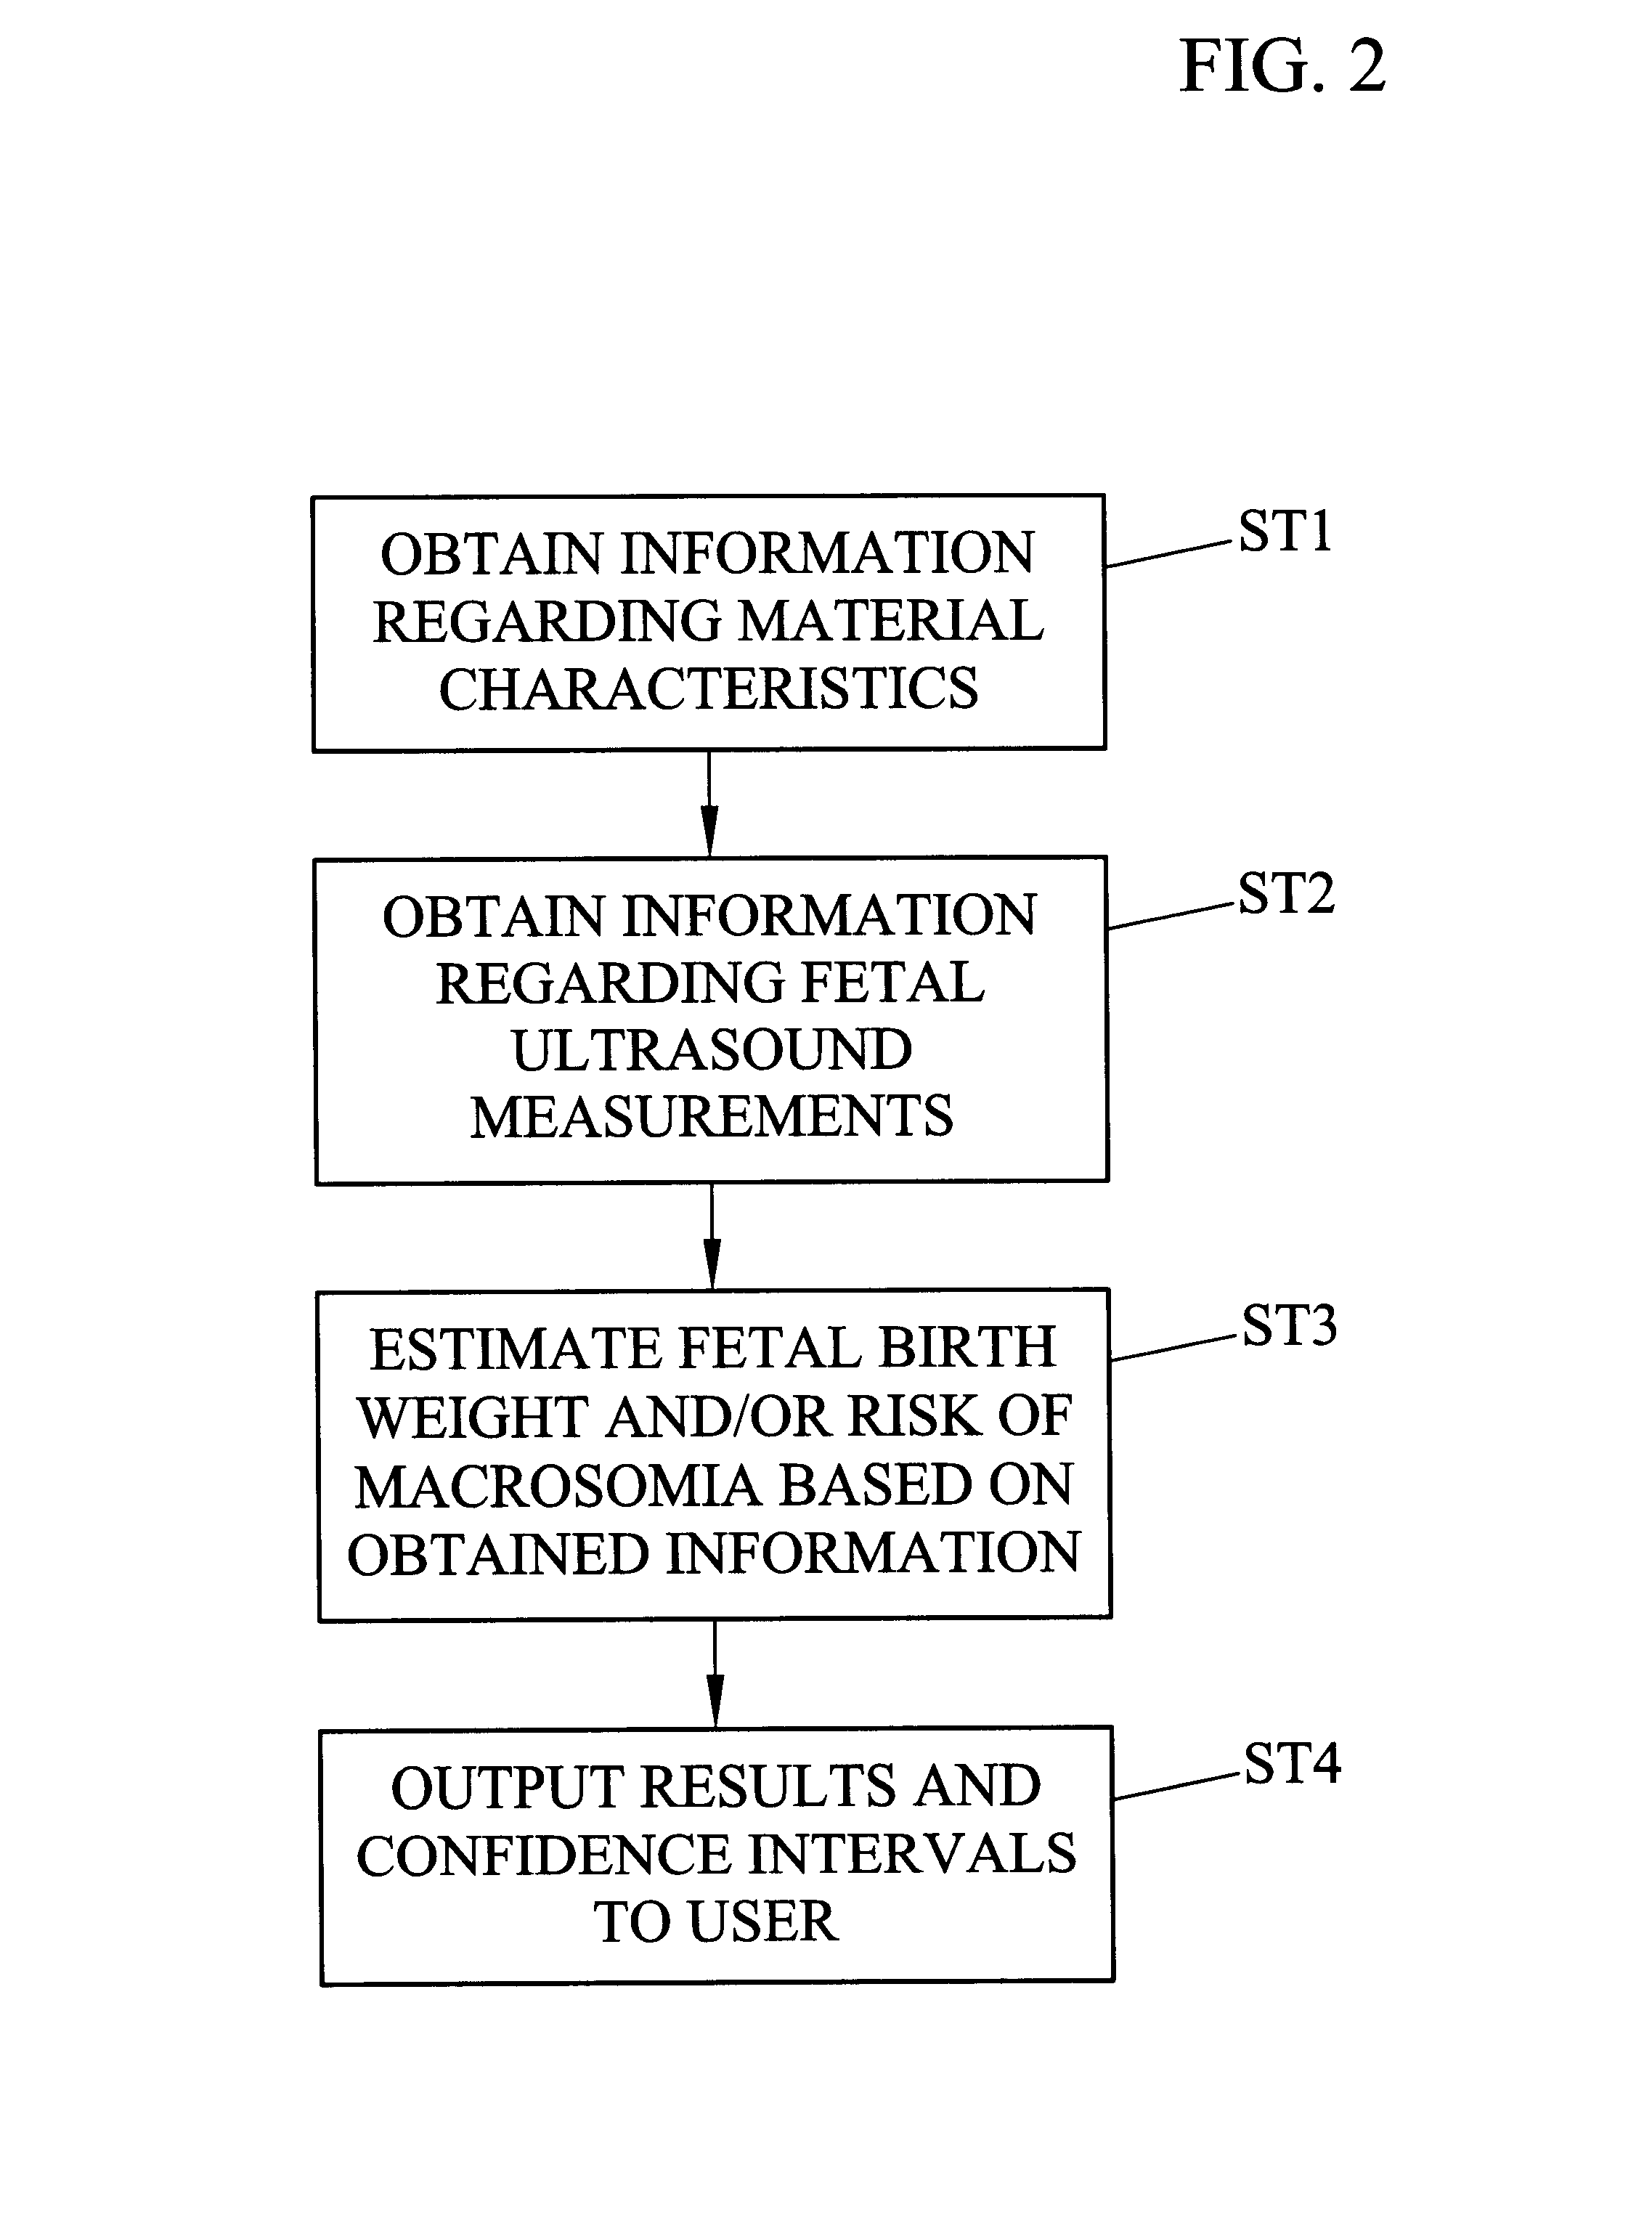 Methods, systems, and computer program products for estimating fetal weight at birth and risk of macrosomia